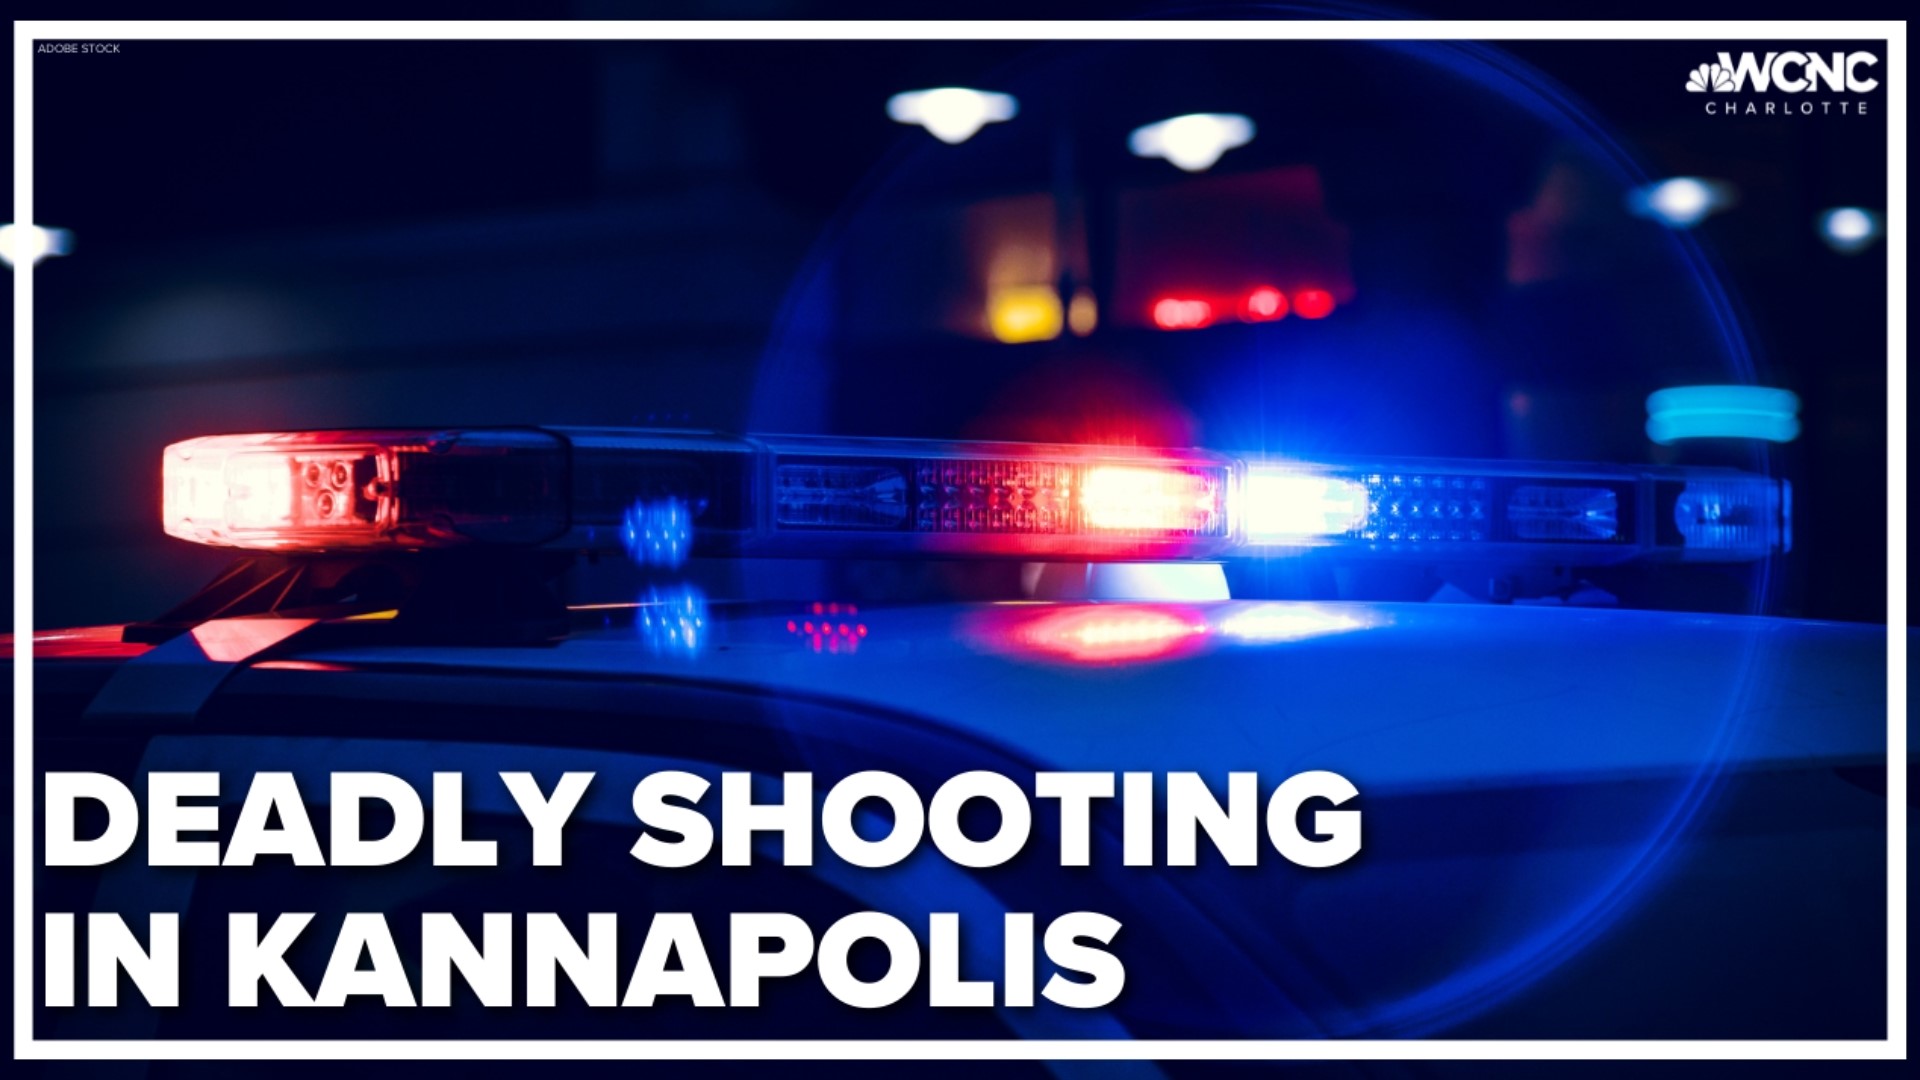 Officers responded to the area of Fairview Street and South Cannon Boulevard around 7:30 p.m. after receiving several calls about a shooting.